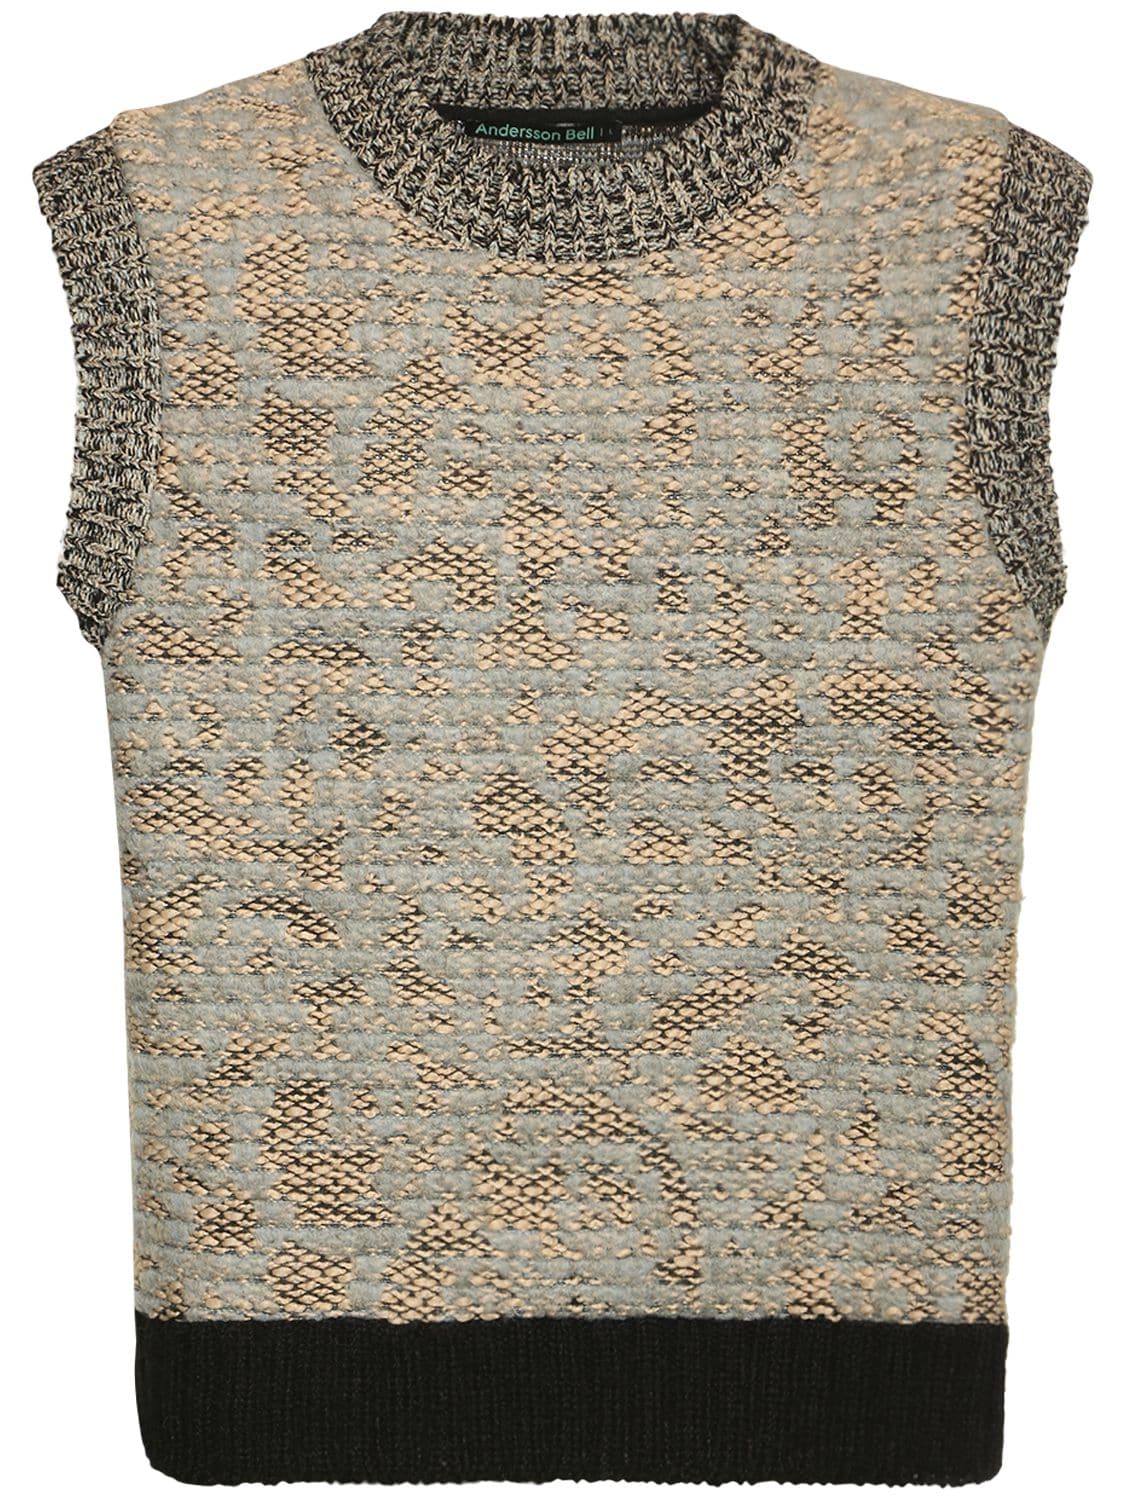 Andersson Bell - Wool blend knit vest - Grey | Luisaviaroma